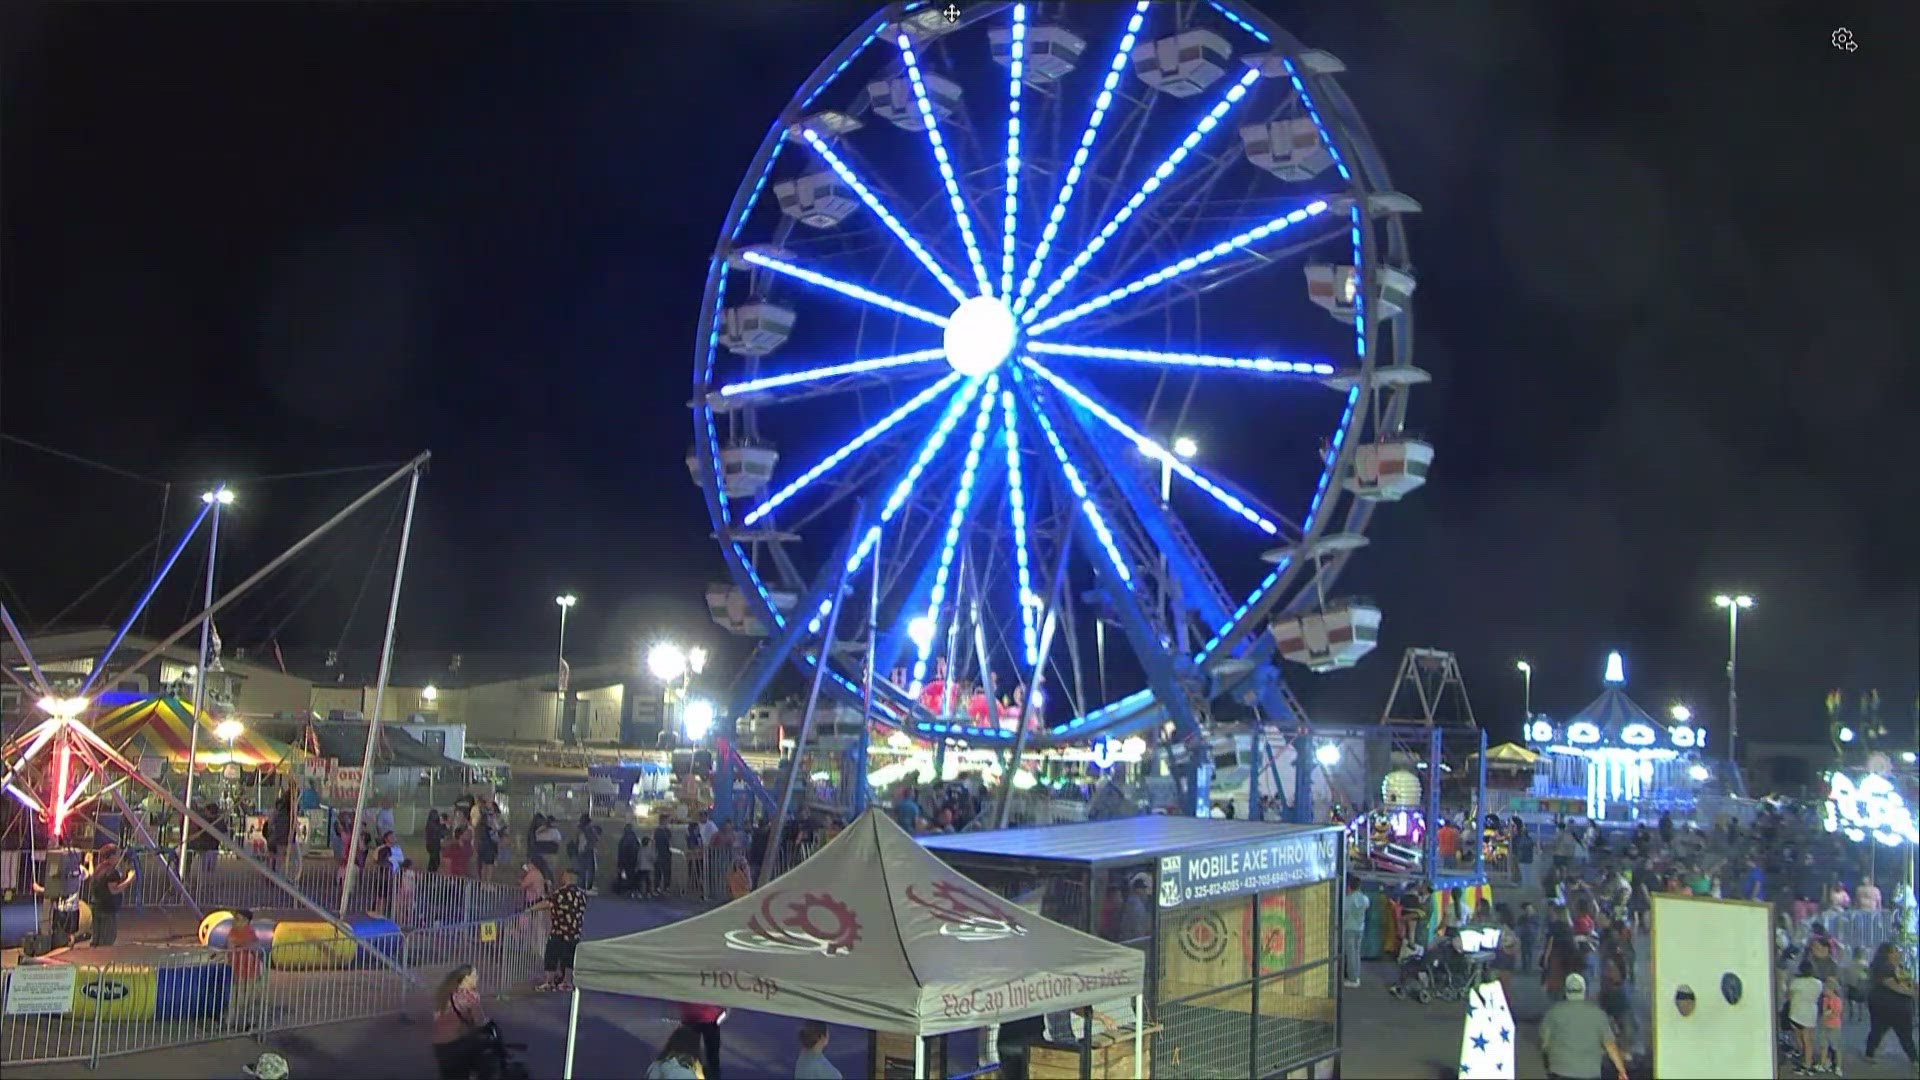 On the Sensory Special Day, anyone with a sensory processing disorder and their families get into the Permian Basin Fair for free.